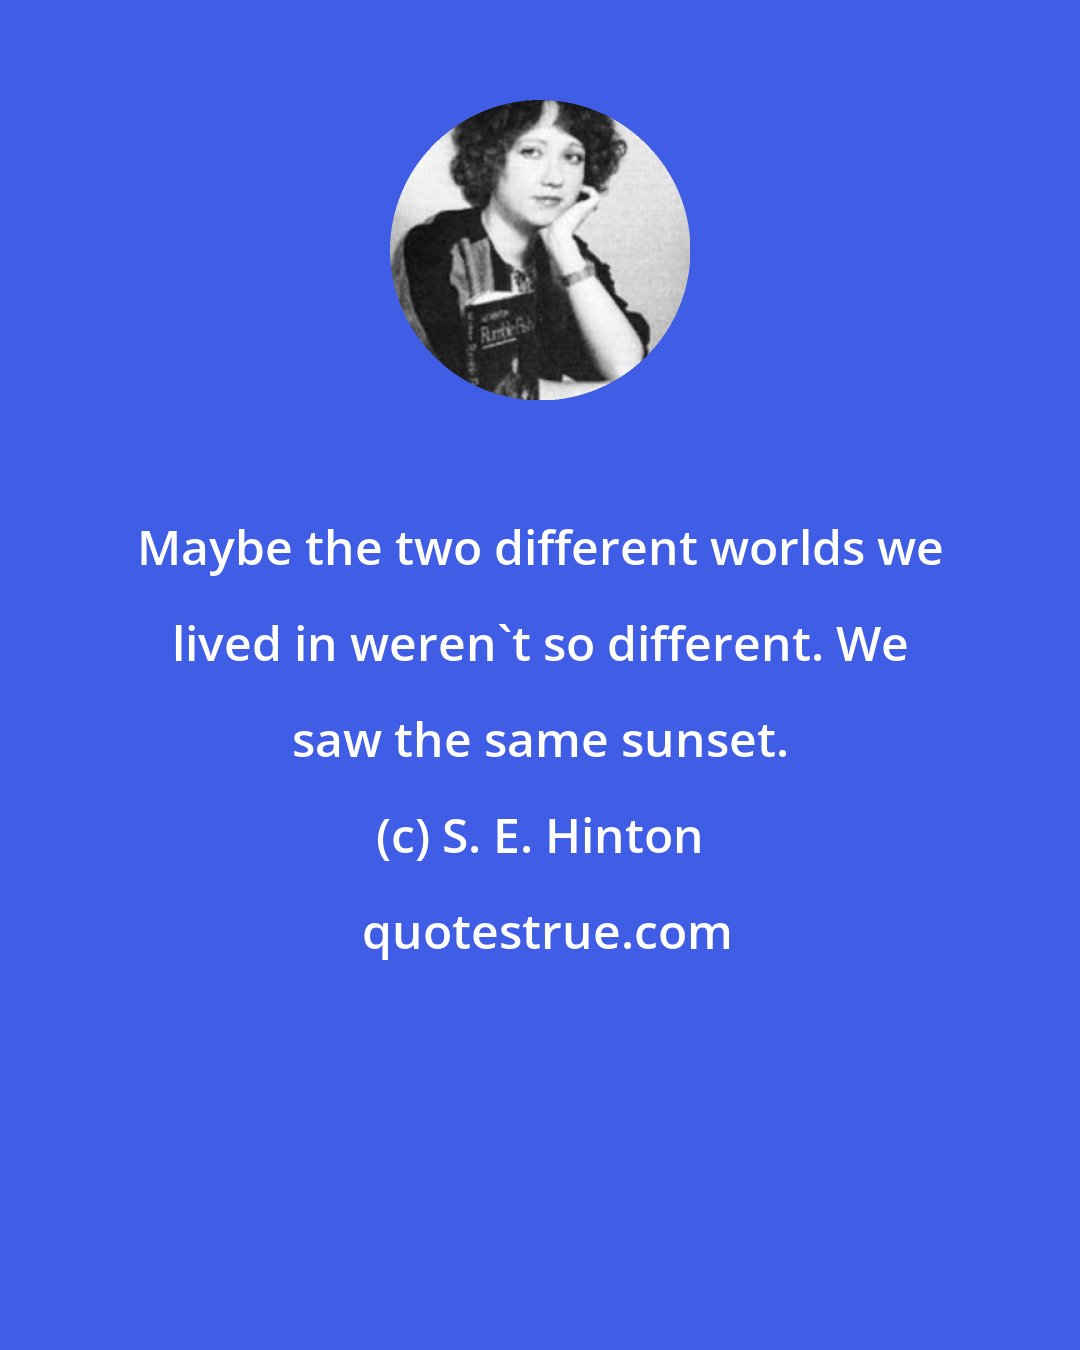 S. E. Hinton: Maybe the two different worlds we lived in weren't so different. We saw the same sunset.